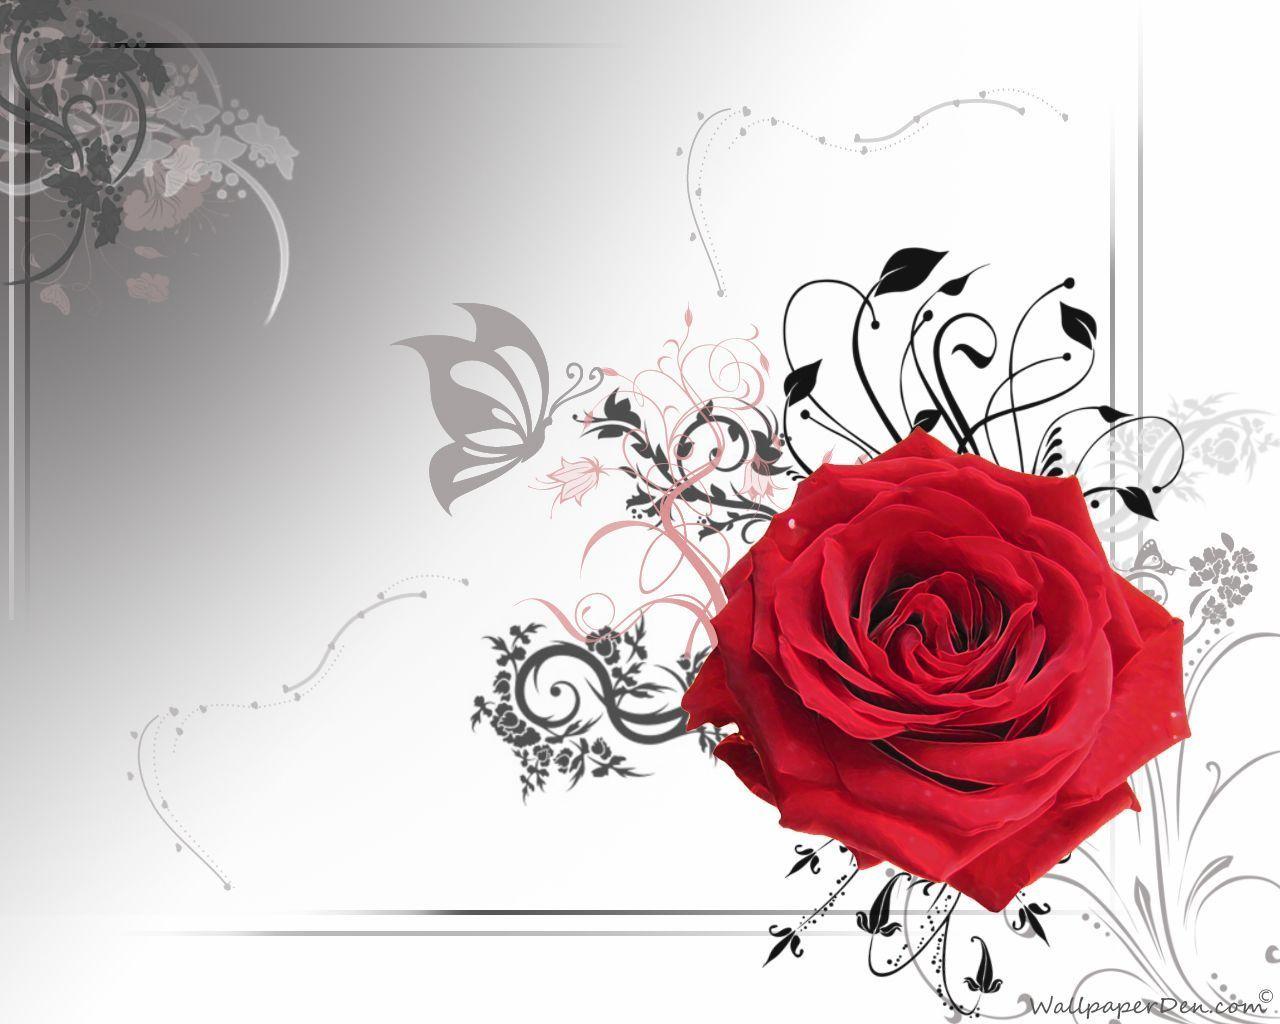 Wallpaper For > White And Red Rose Wallpaper